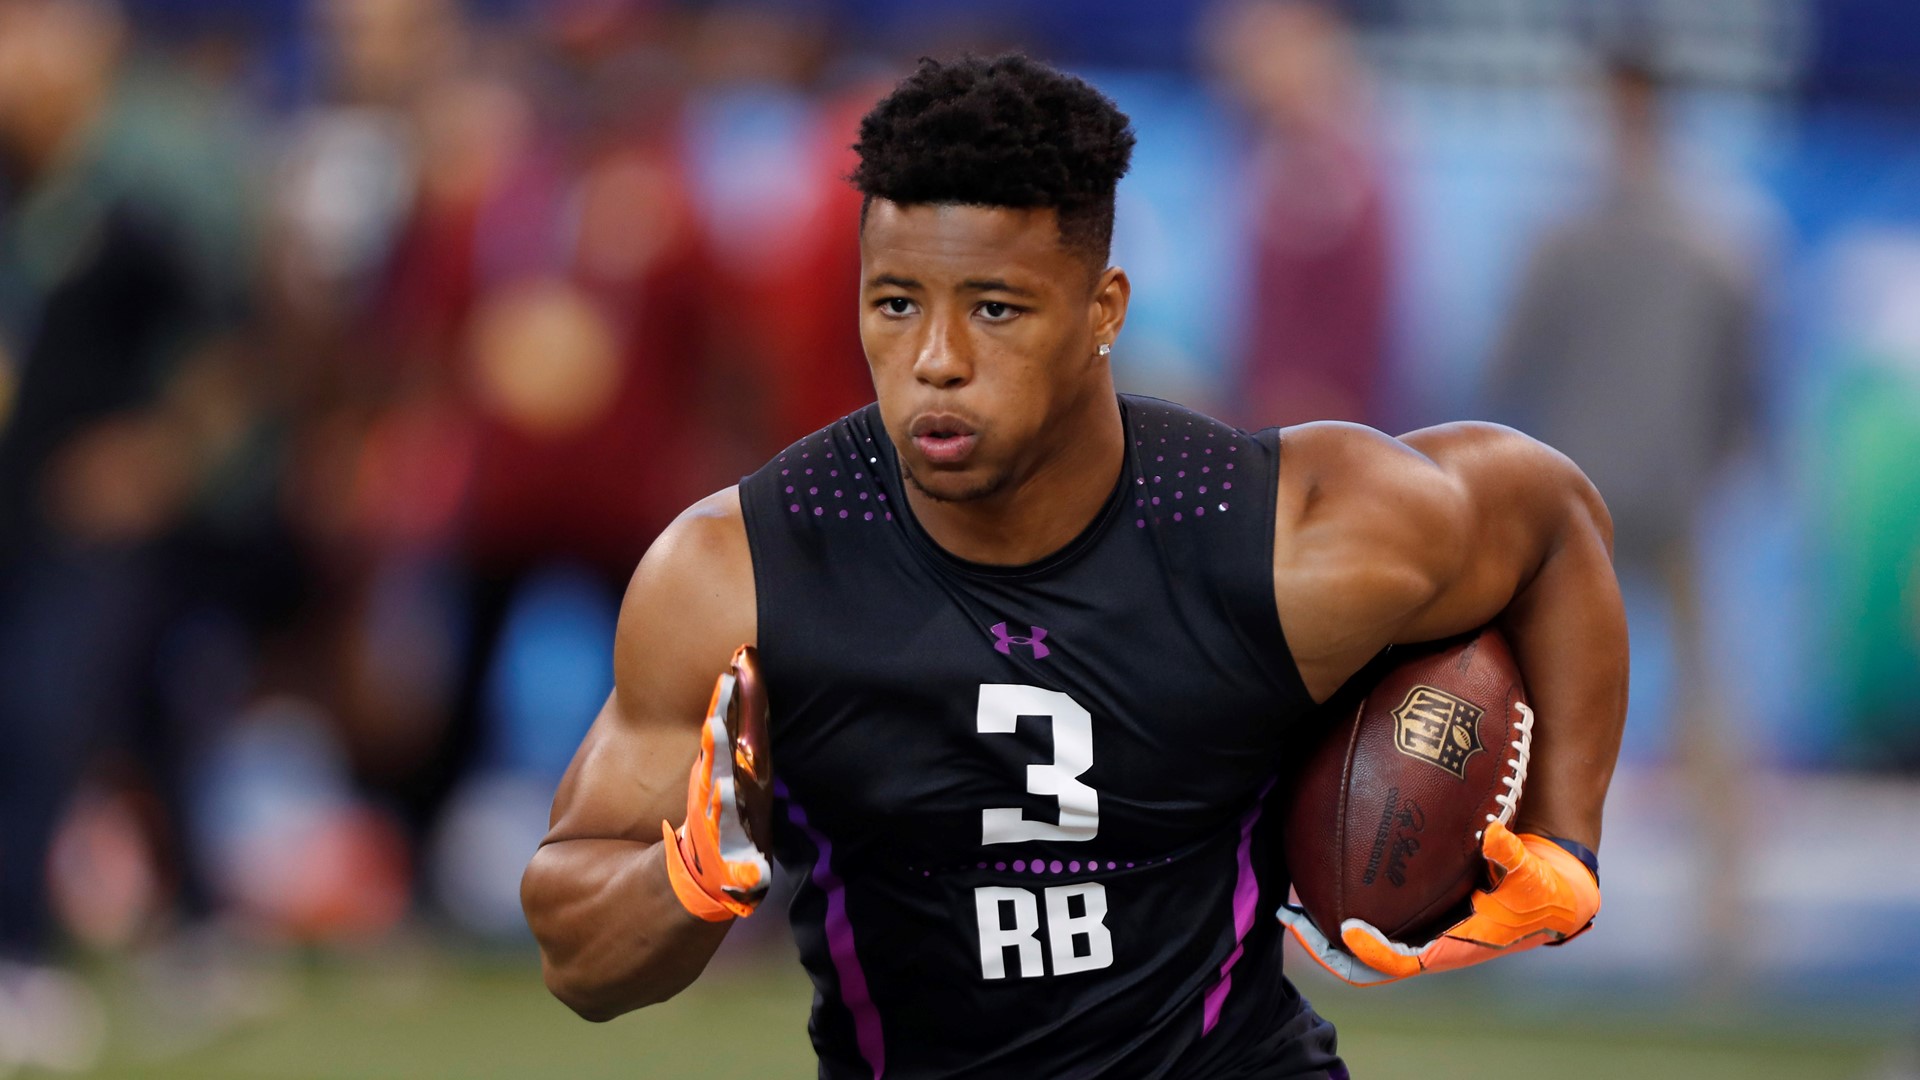 Top 40 NFL draft prospect rankings: Who's best overall in 2018 class